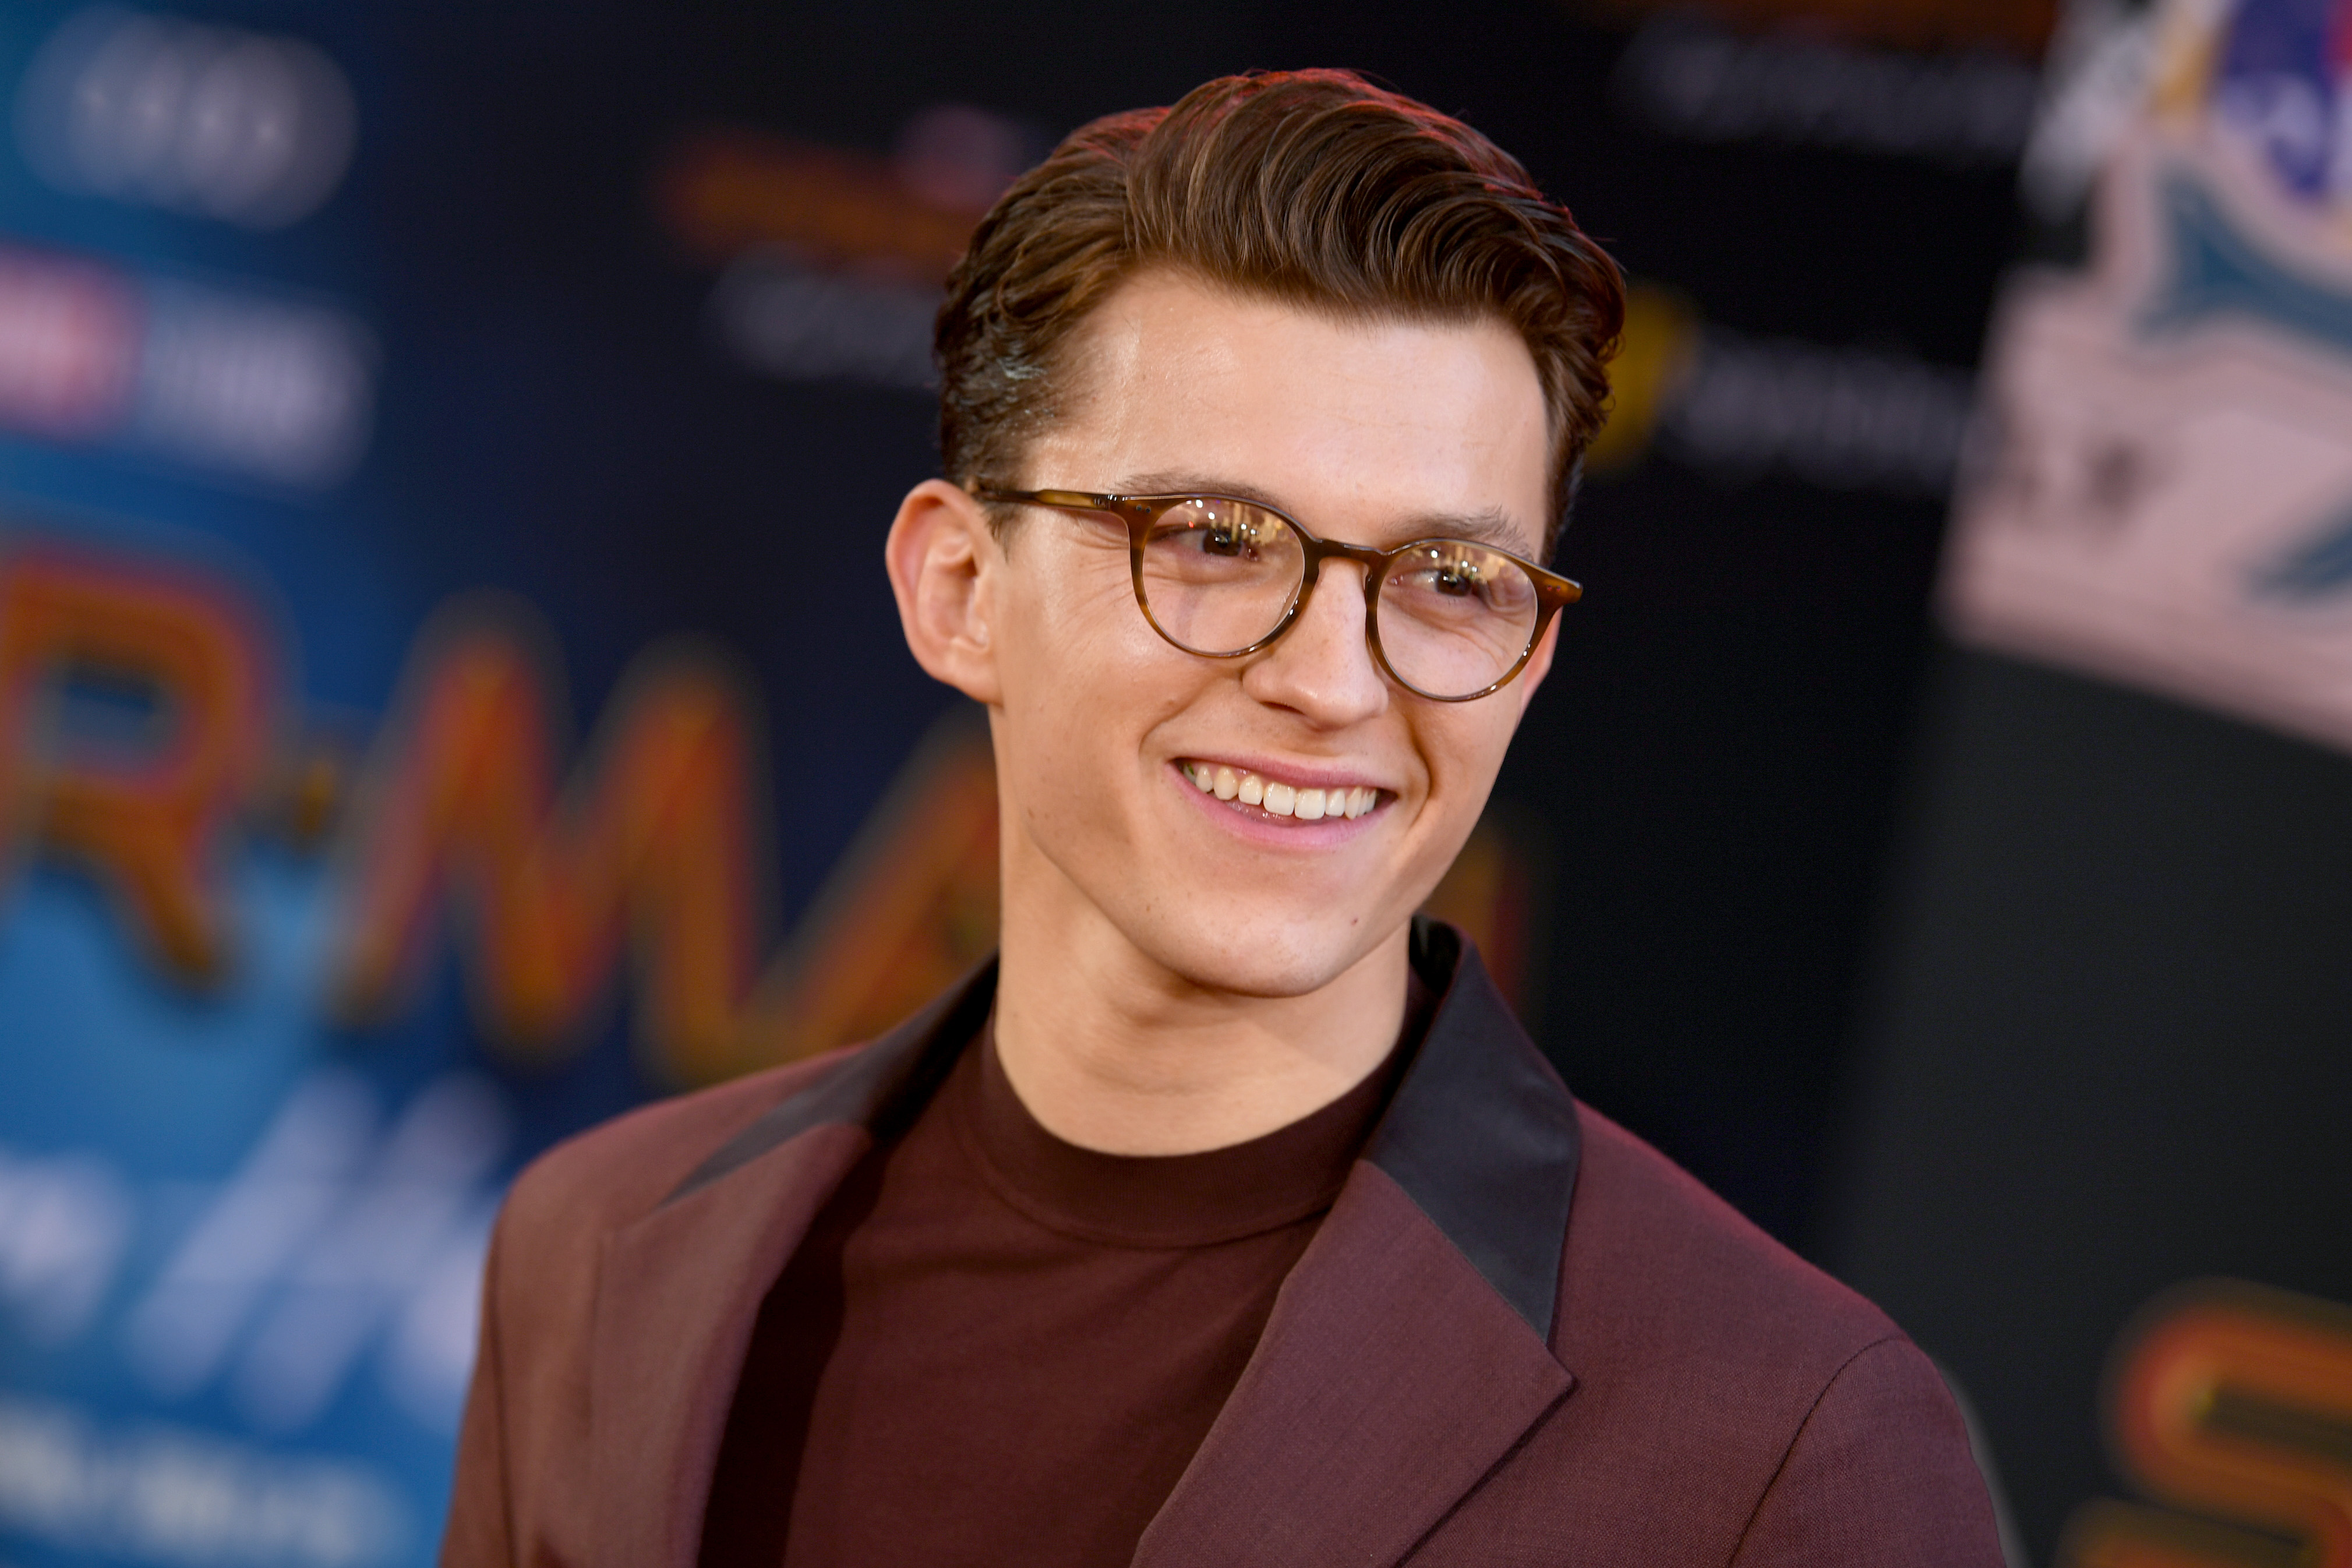 'Spider-Man: No Way Home' star Tom Holland wears a maroon suit over a darker maroon t-shirt and wears a pair of glasses.